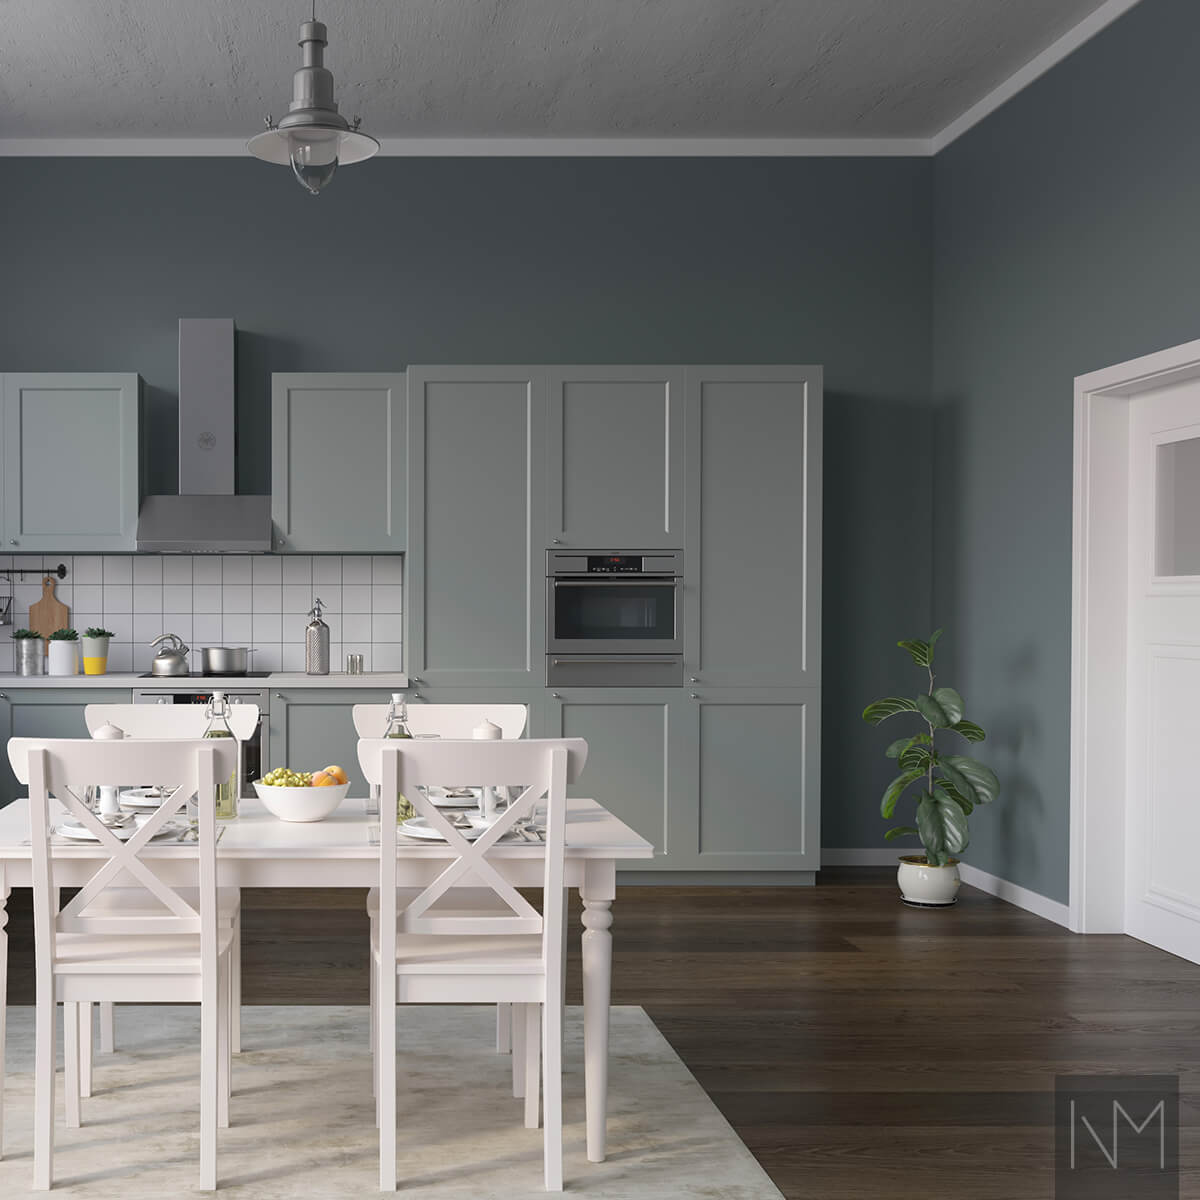 IKEA Metod or Faktum kitchen CLASSIC. Colour NCS 5105-B81G or Jotun Evening Green 6352